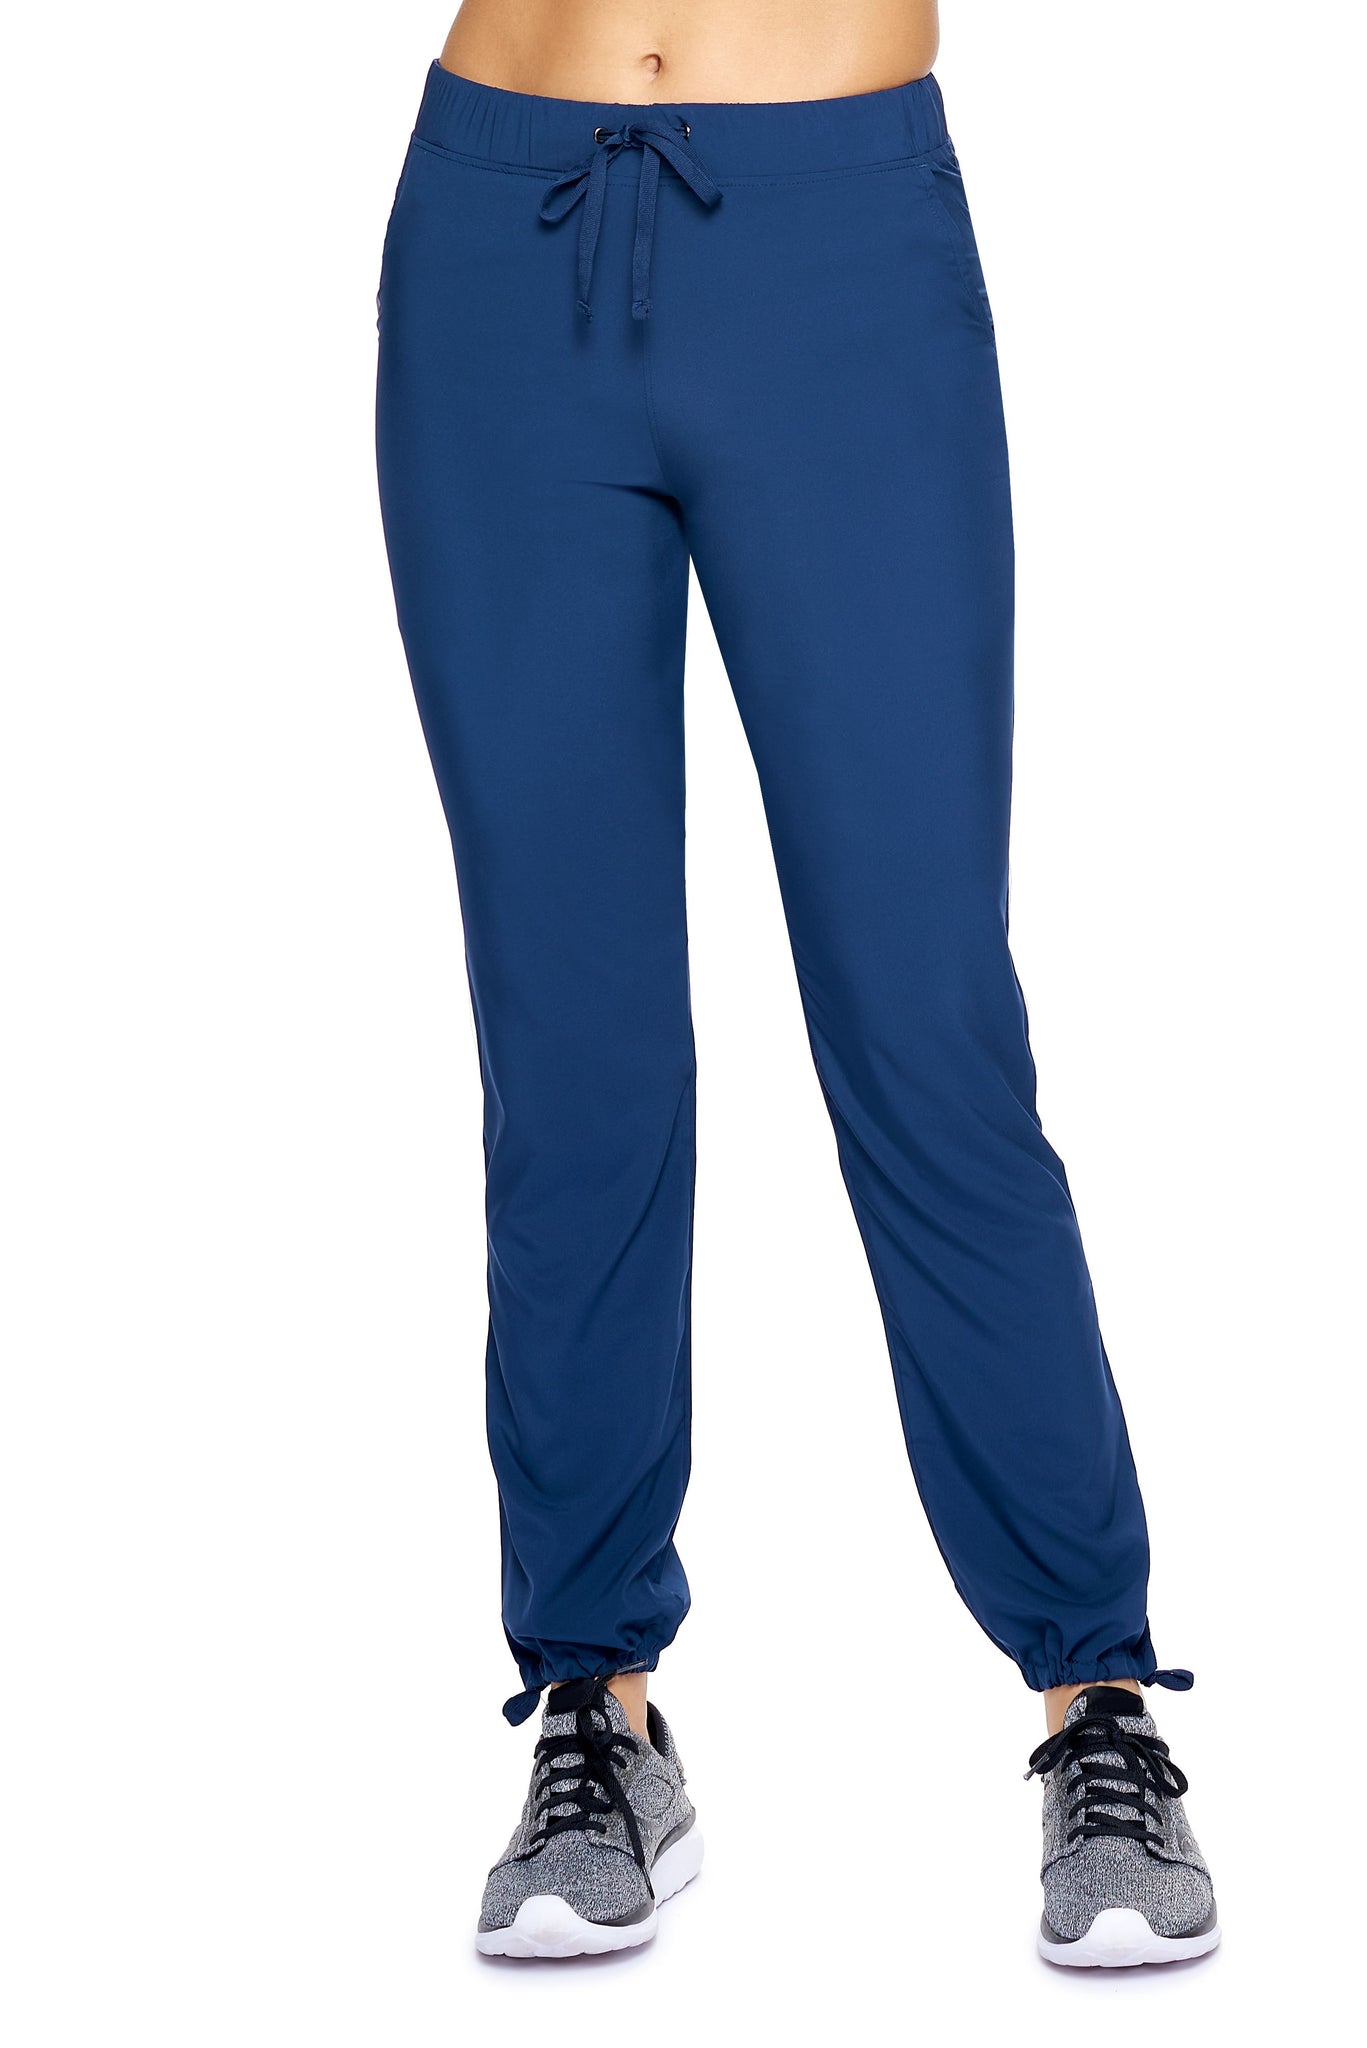 Expert Brand Wholesale Women's Gym Joggers in Navy#navy